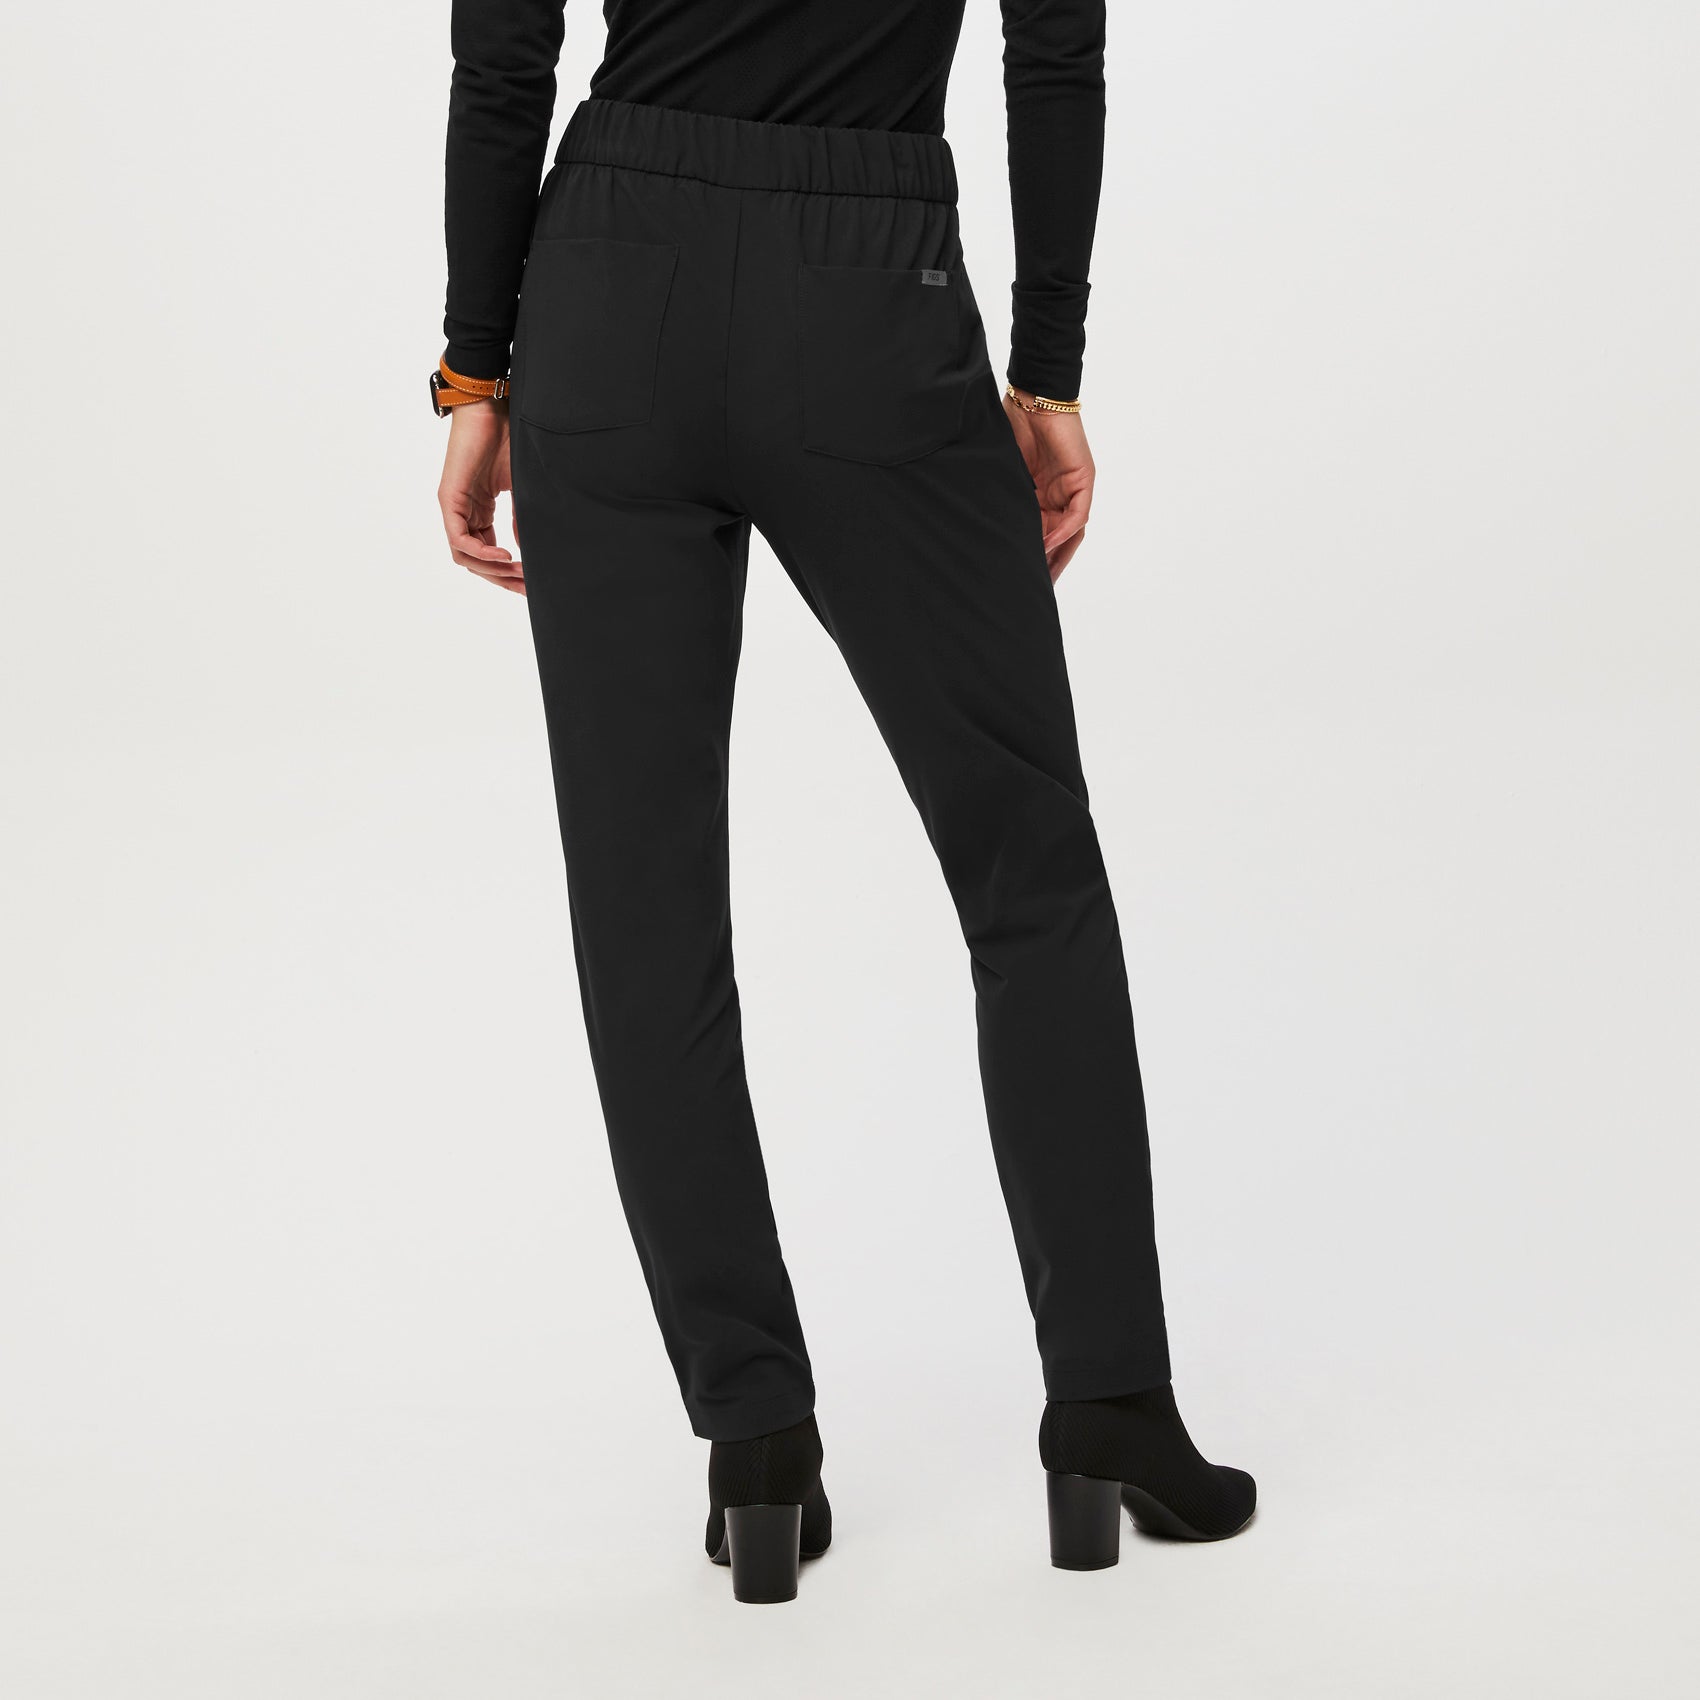 Buy Jet Black Trousers & Pants for Women by Fig Online